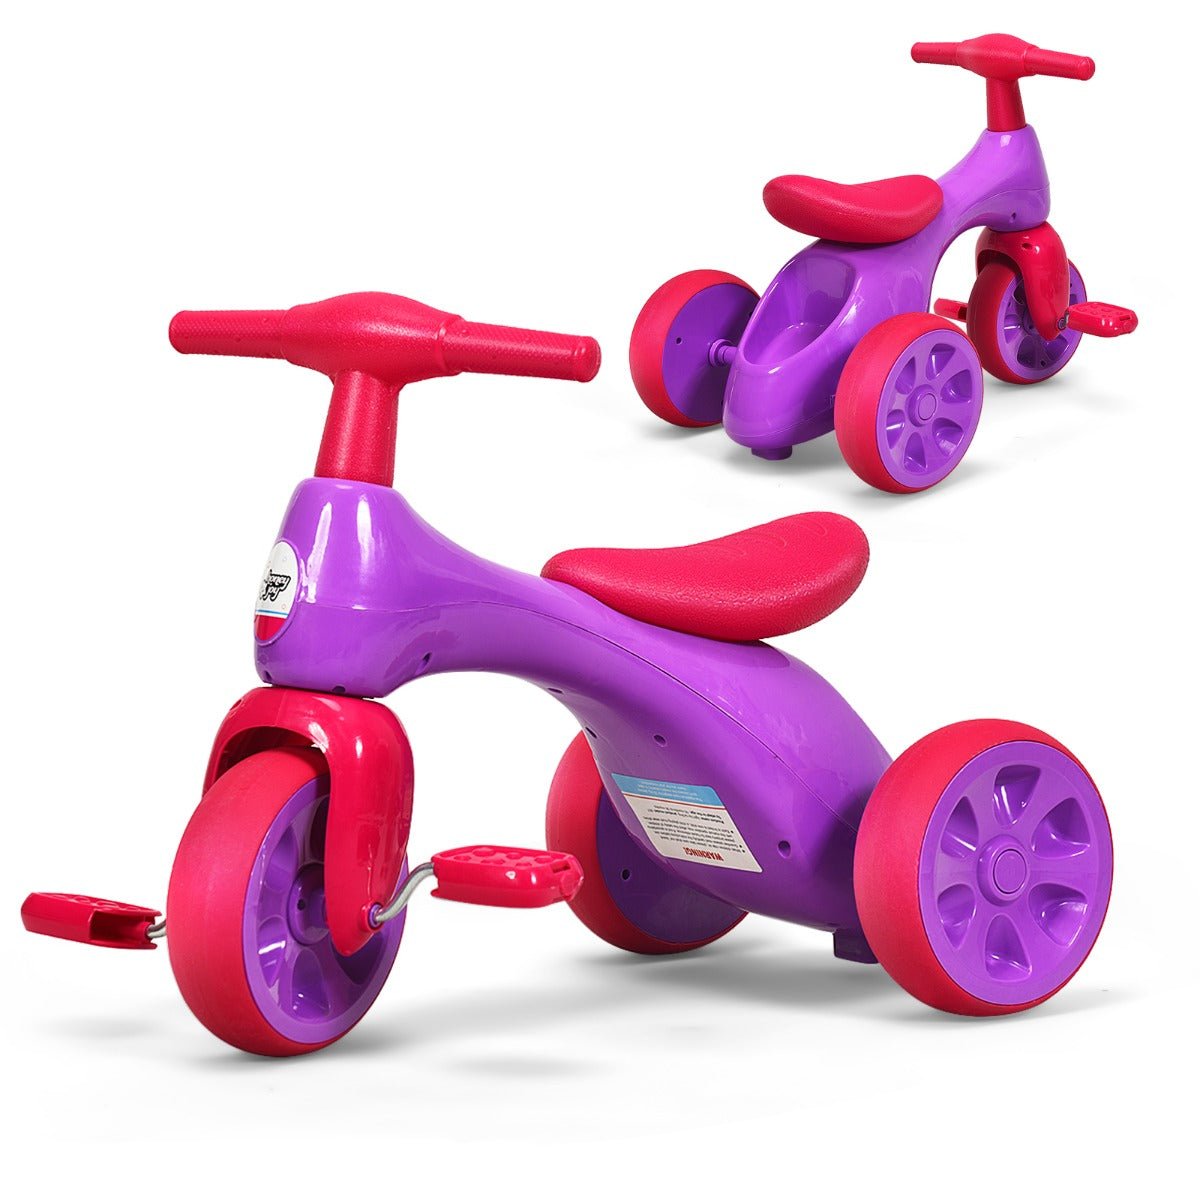 Pink Toddler Tricycle: Fun Foot Pedal Trike for Little Explorers